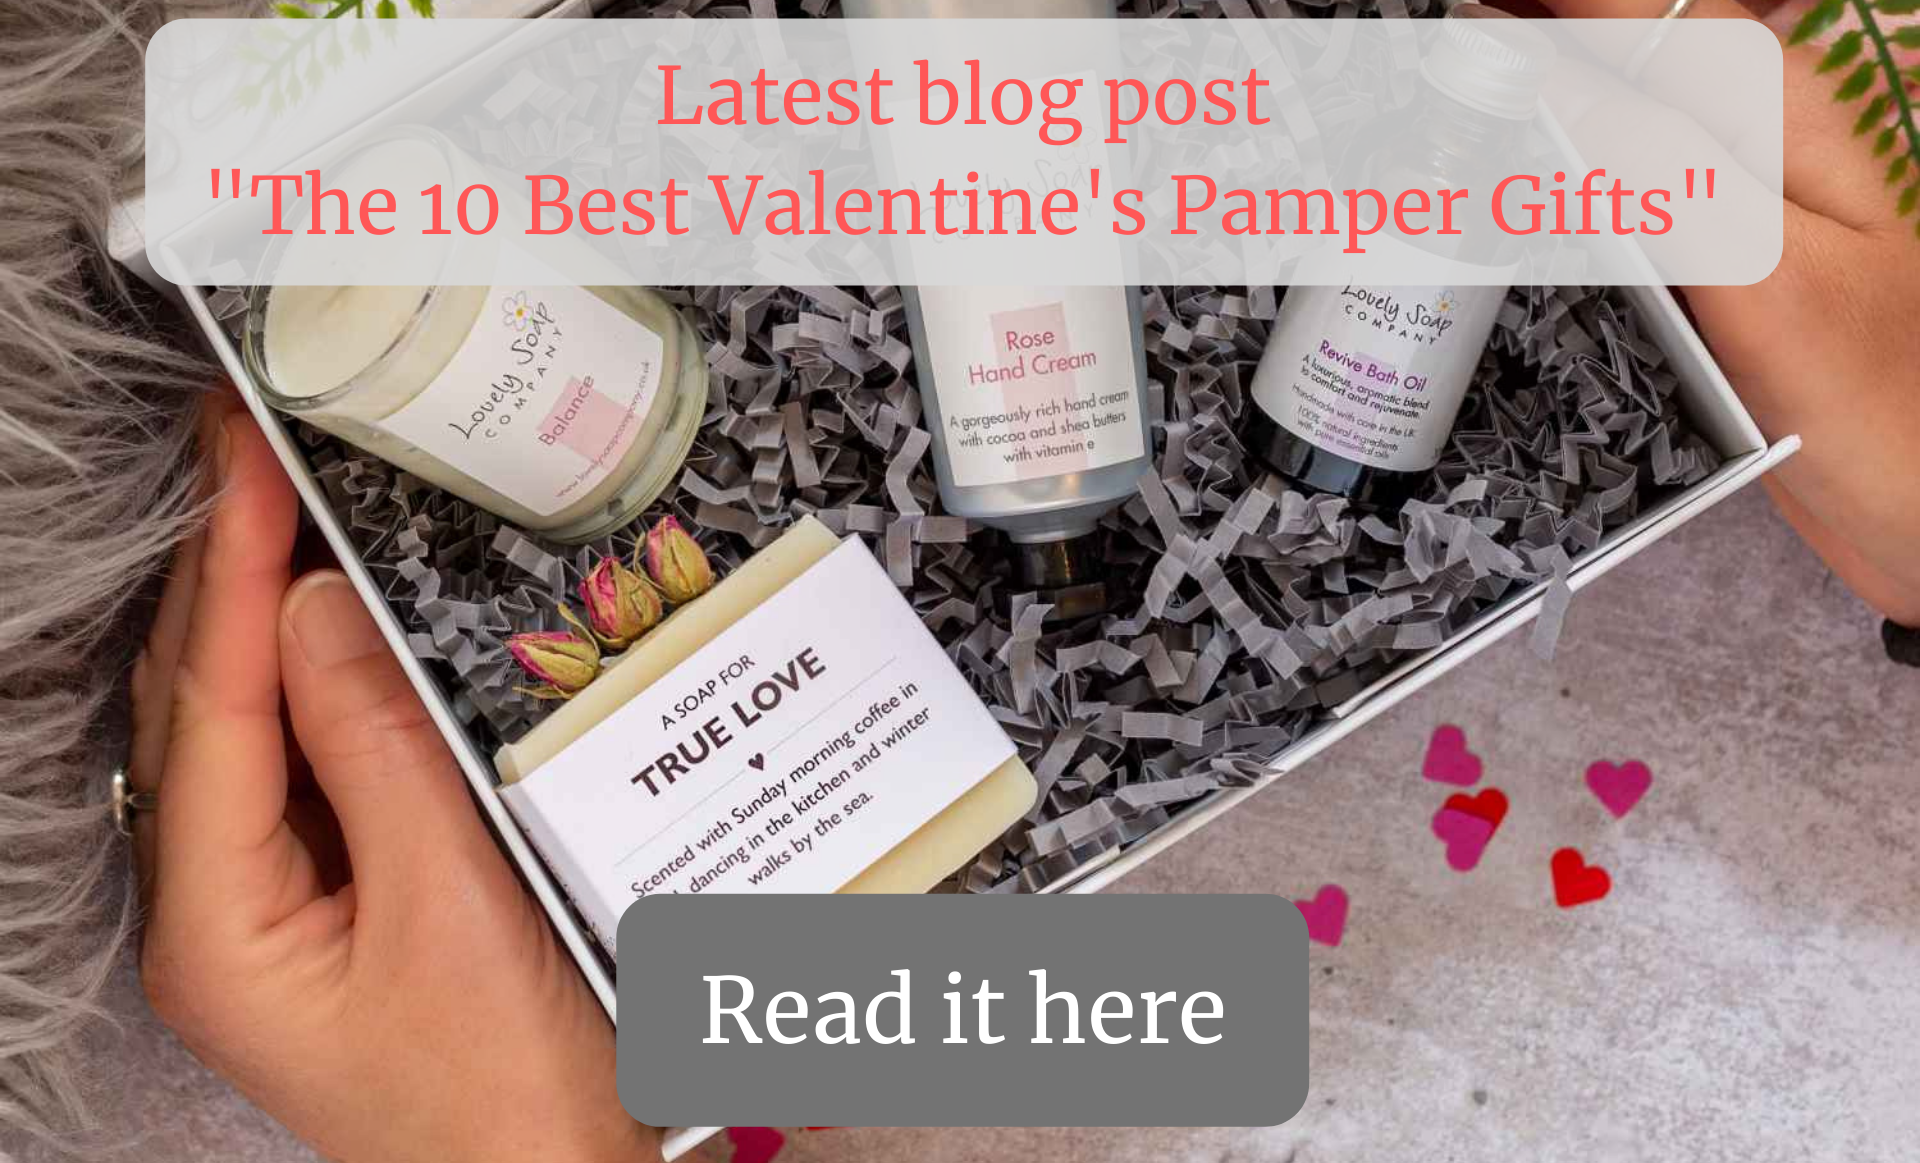 best valentine pamper gifts spa personalised soap, candle, hand cream and bath oil